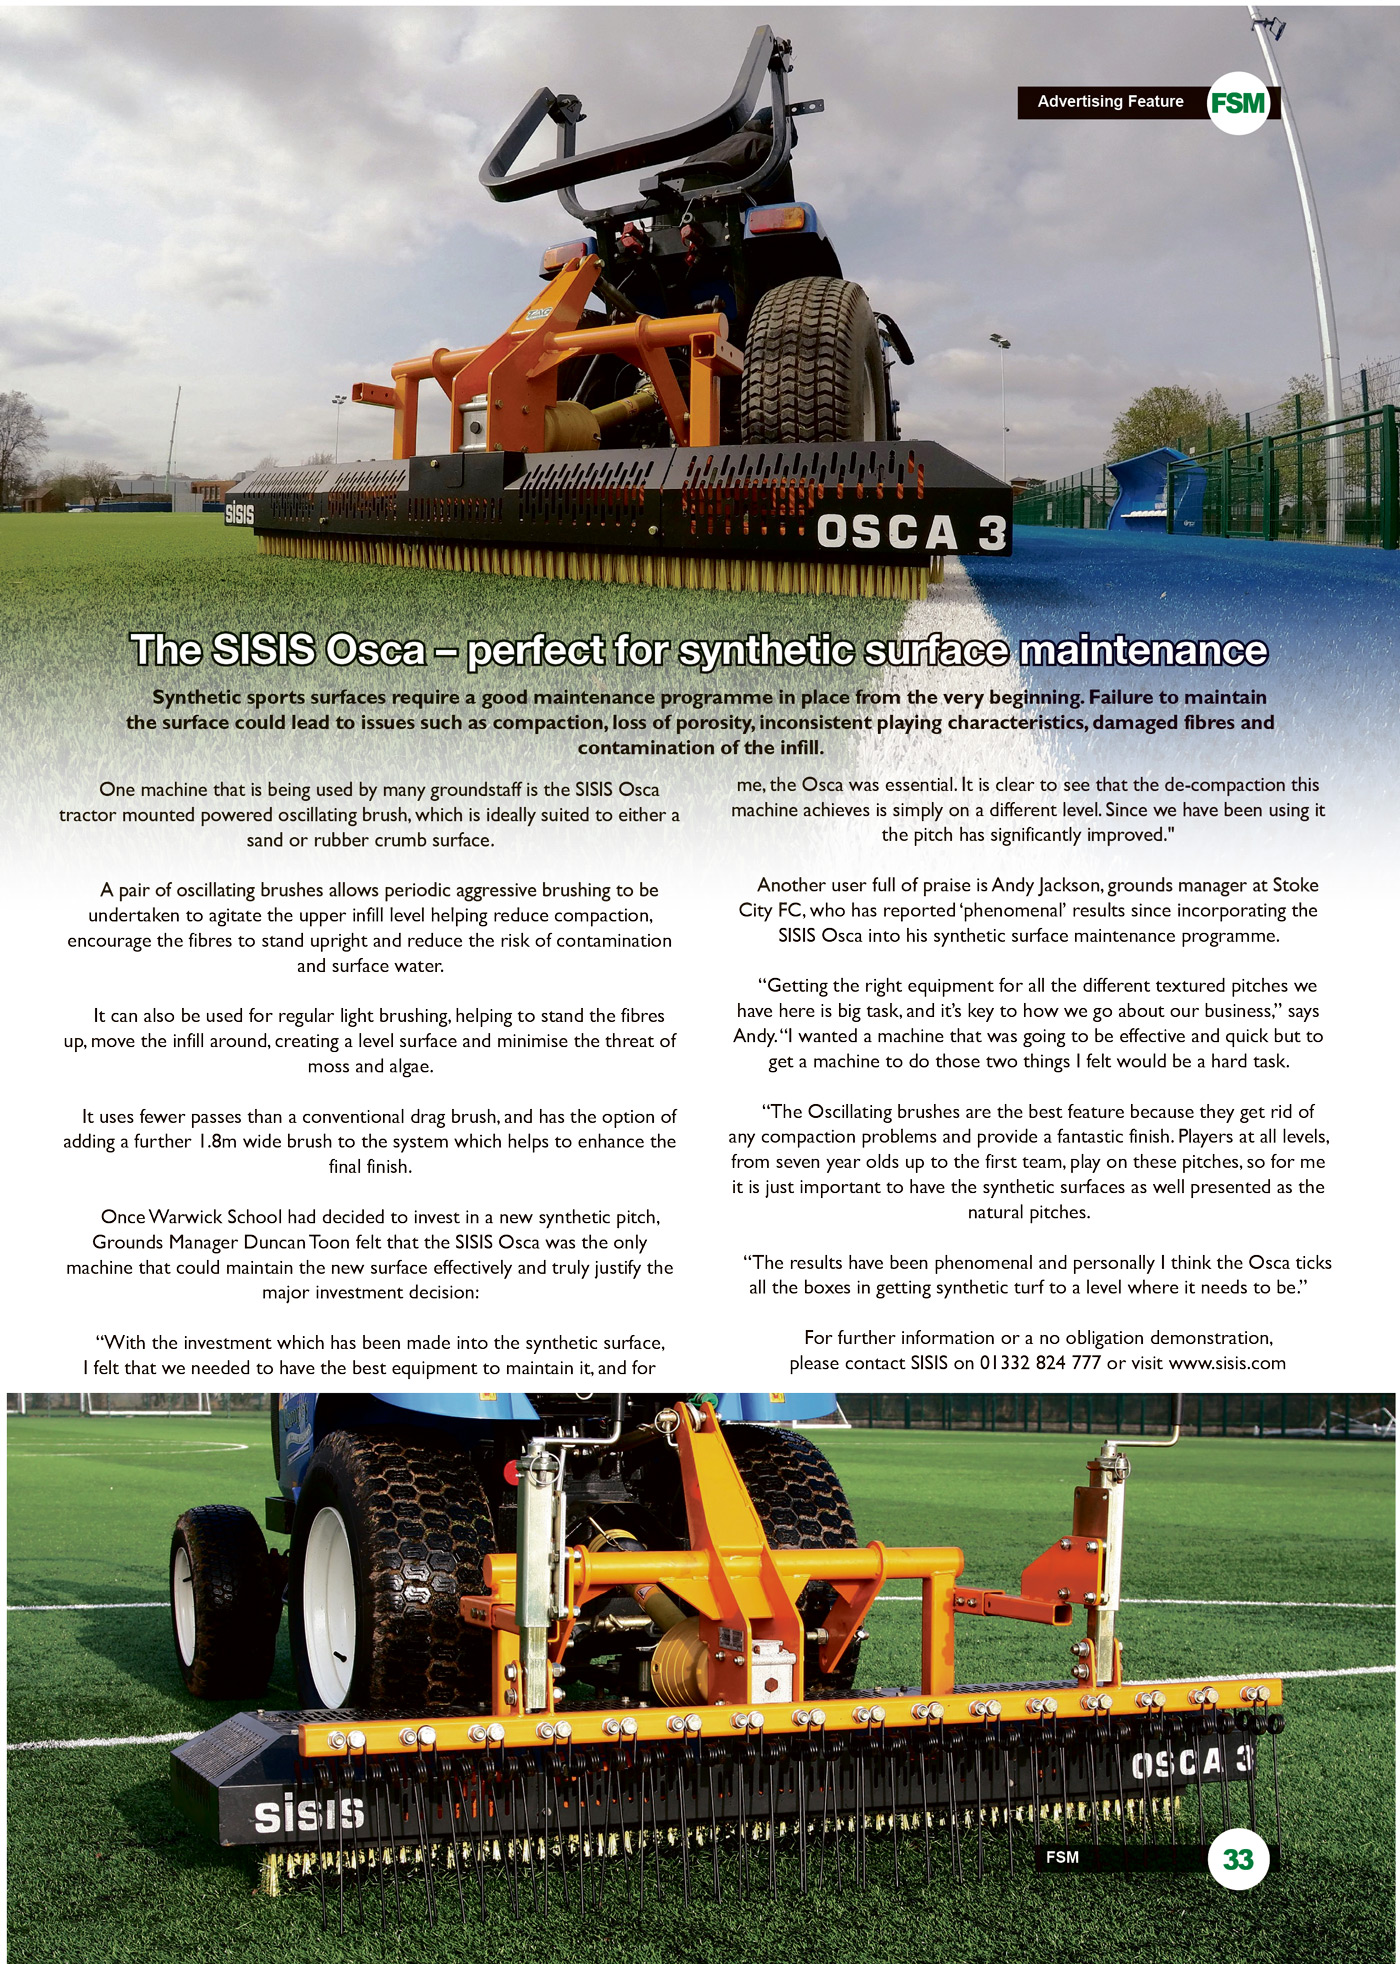 The SISIS Osca – Perfect For Synthetic Surface Maintenance